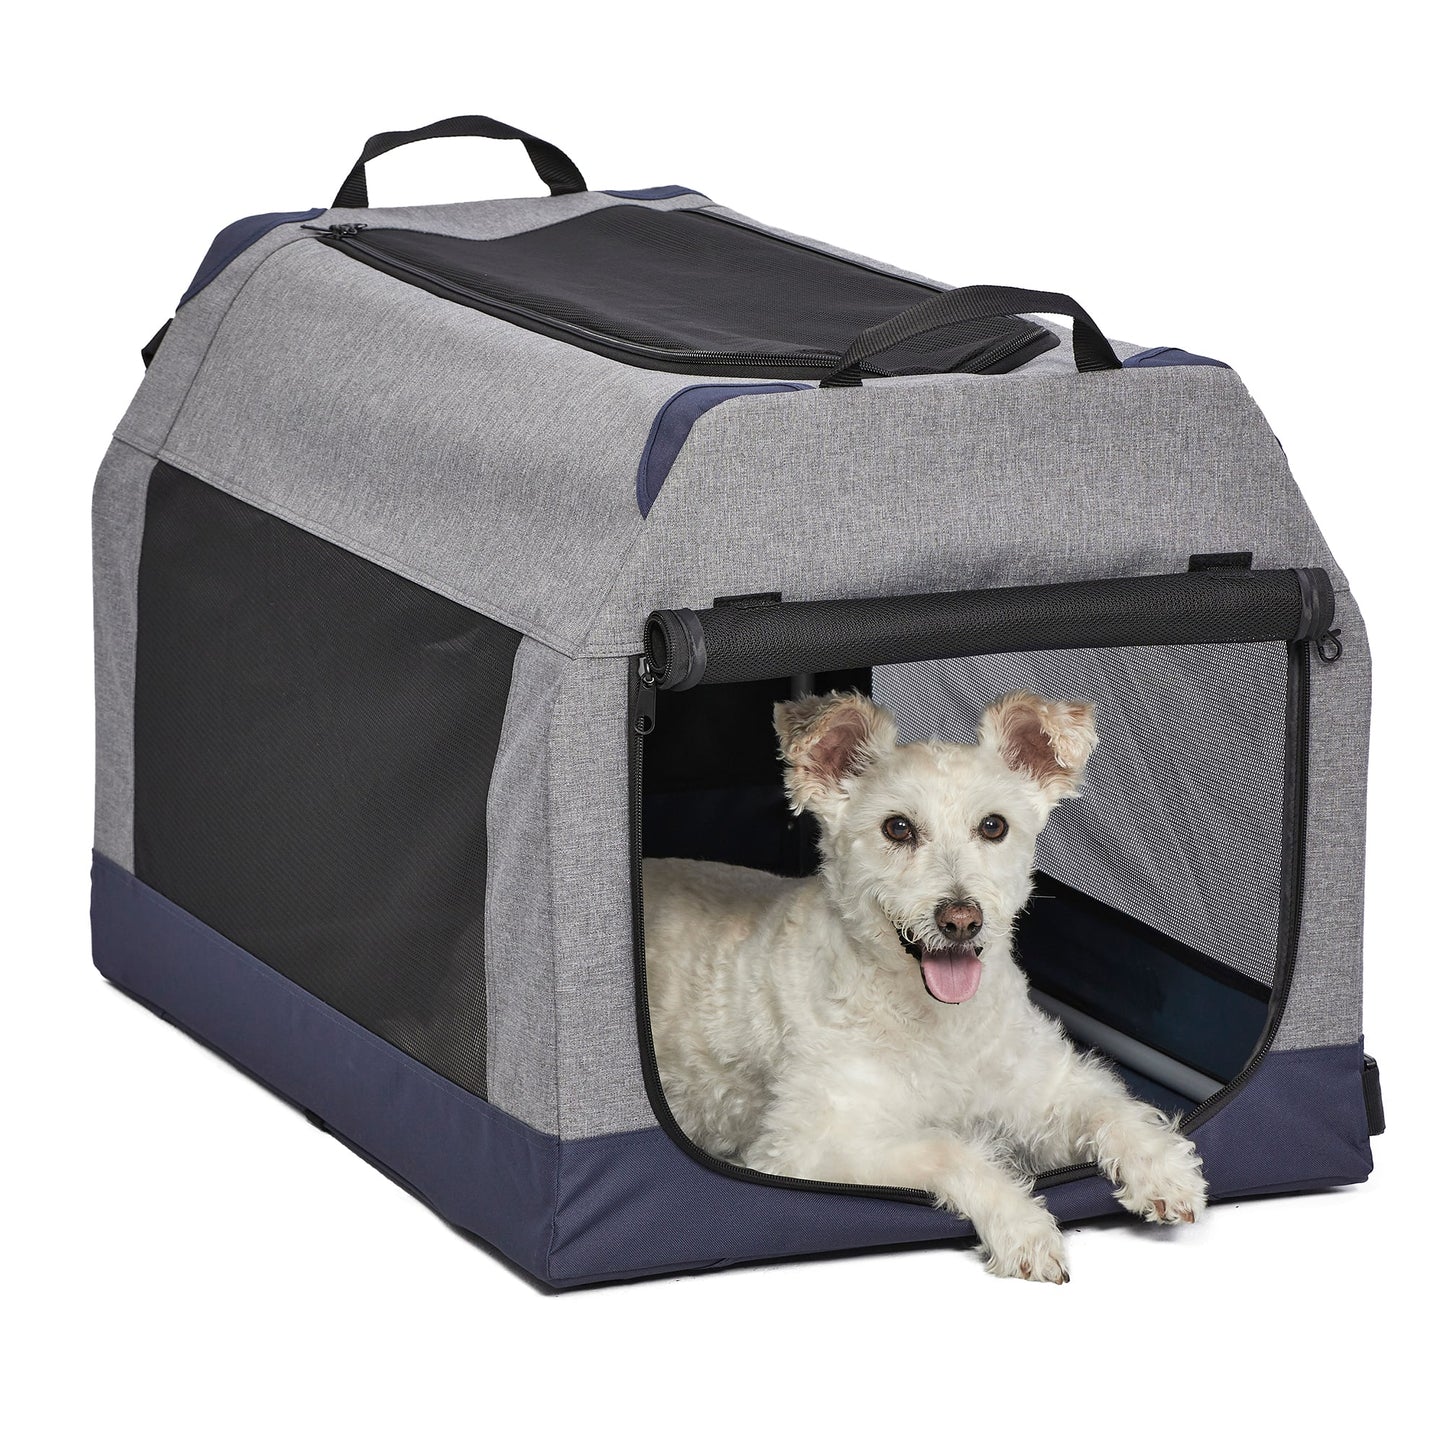 Midwest Gray Canine Camper Soft Tent Dog Crate, 30.32 L X 20.16" W X 19.49" H